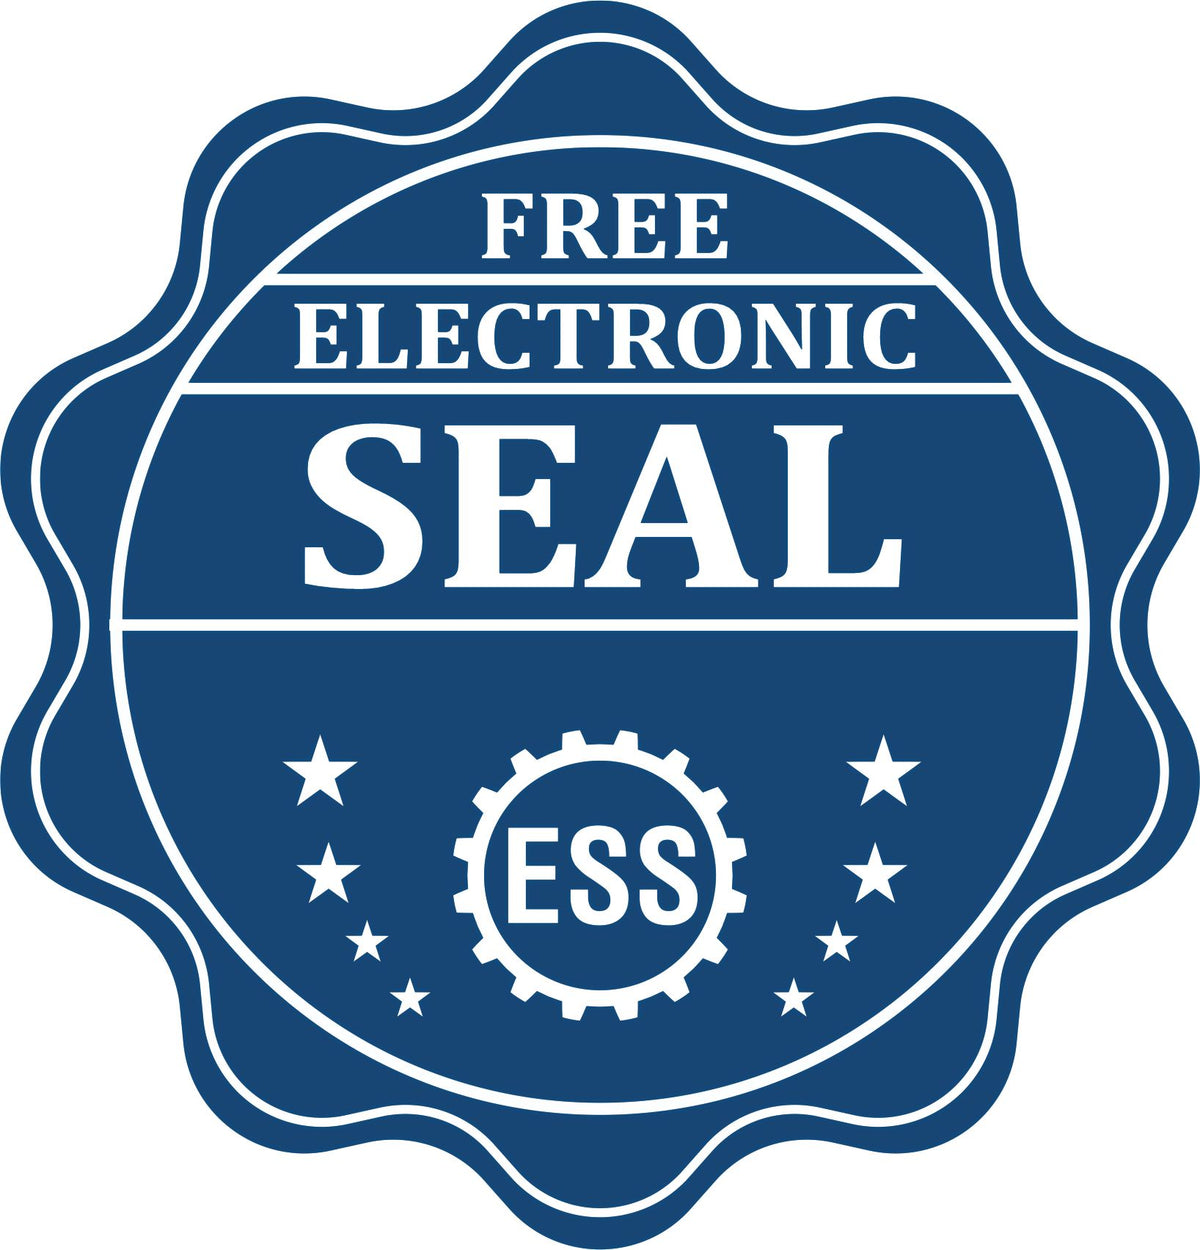 A badge showing a free electronic seal for the Long Reach Georgia Land Surveyor Seal with stars and the ESS gear on the emblem.